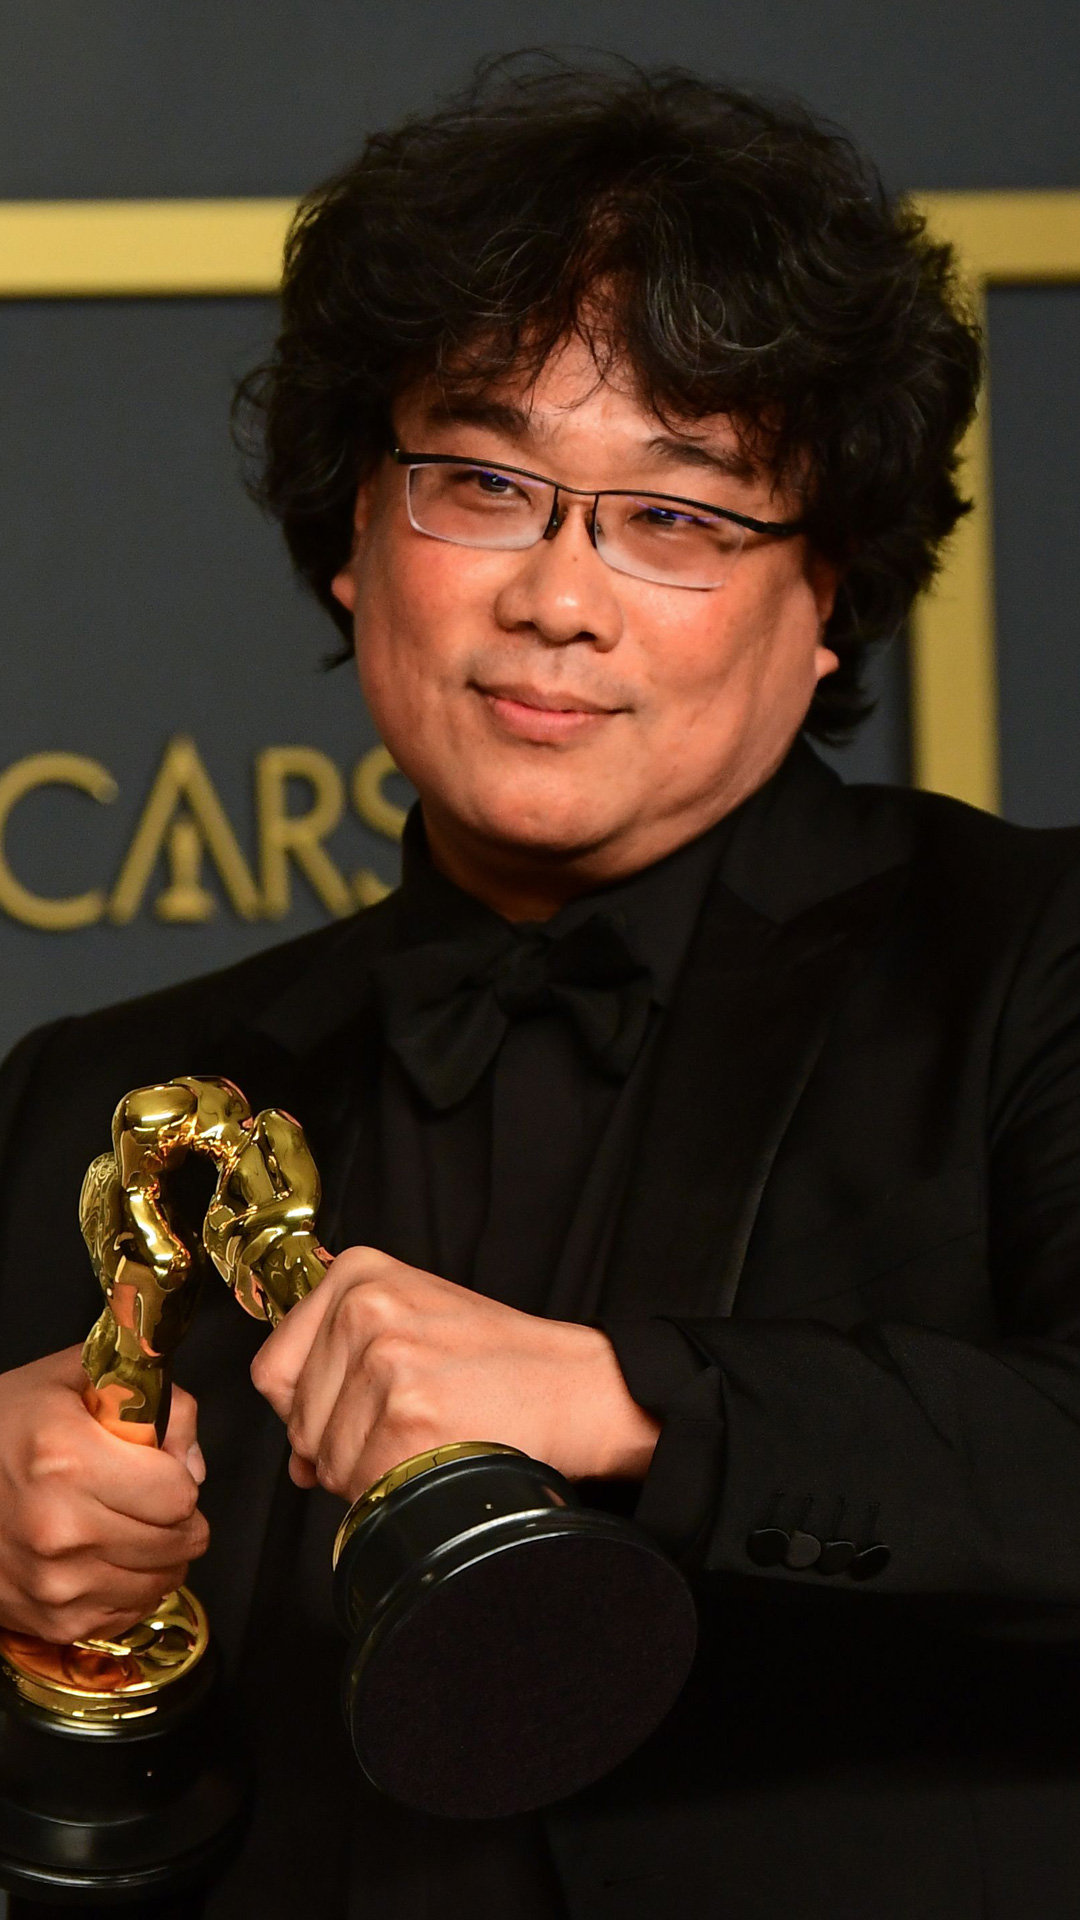 Parasite director Bong Joon Ho and cast members walking on the red carpet  at the 92nd Annual Academy Awards held at the Dolby Theatre in Hollywood,  California on Feb. 9, 2020. (Photo